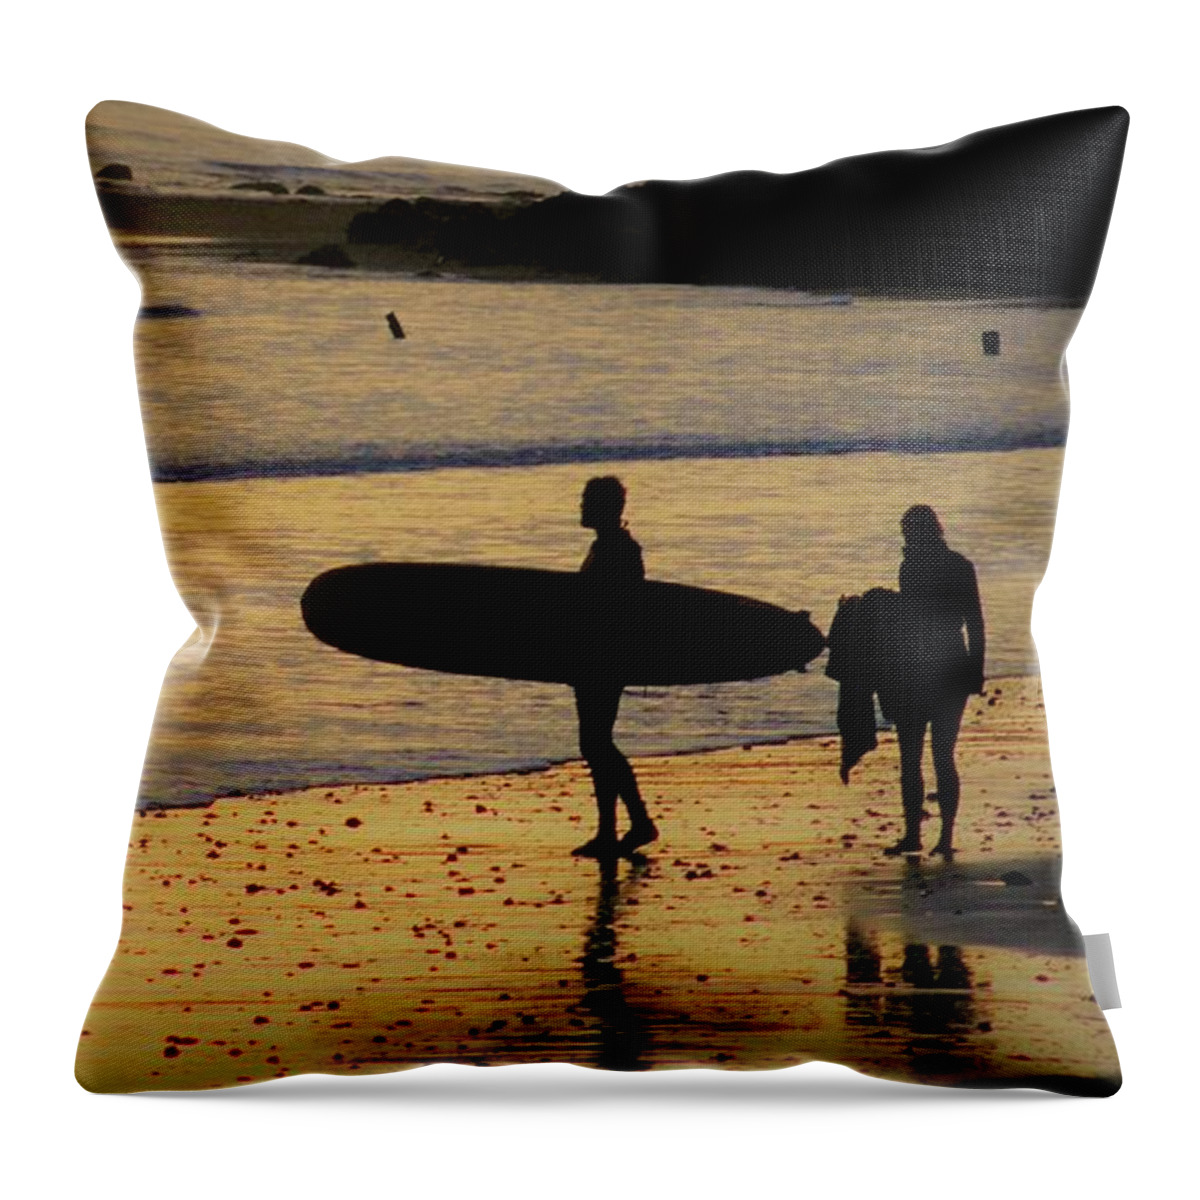 Surf Throw Pillow featuring the photograph Evening Surf by FD Graham